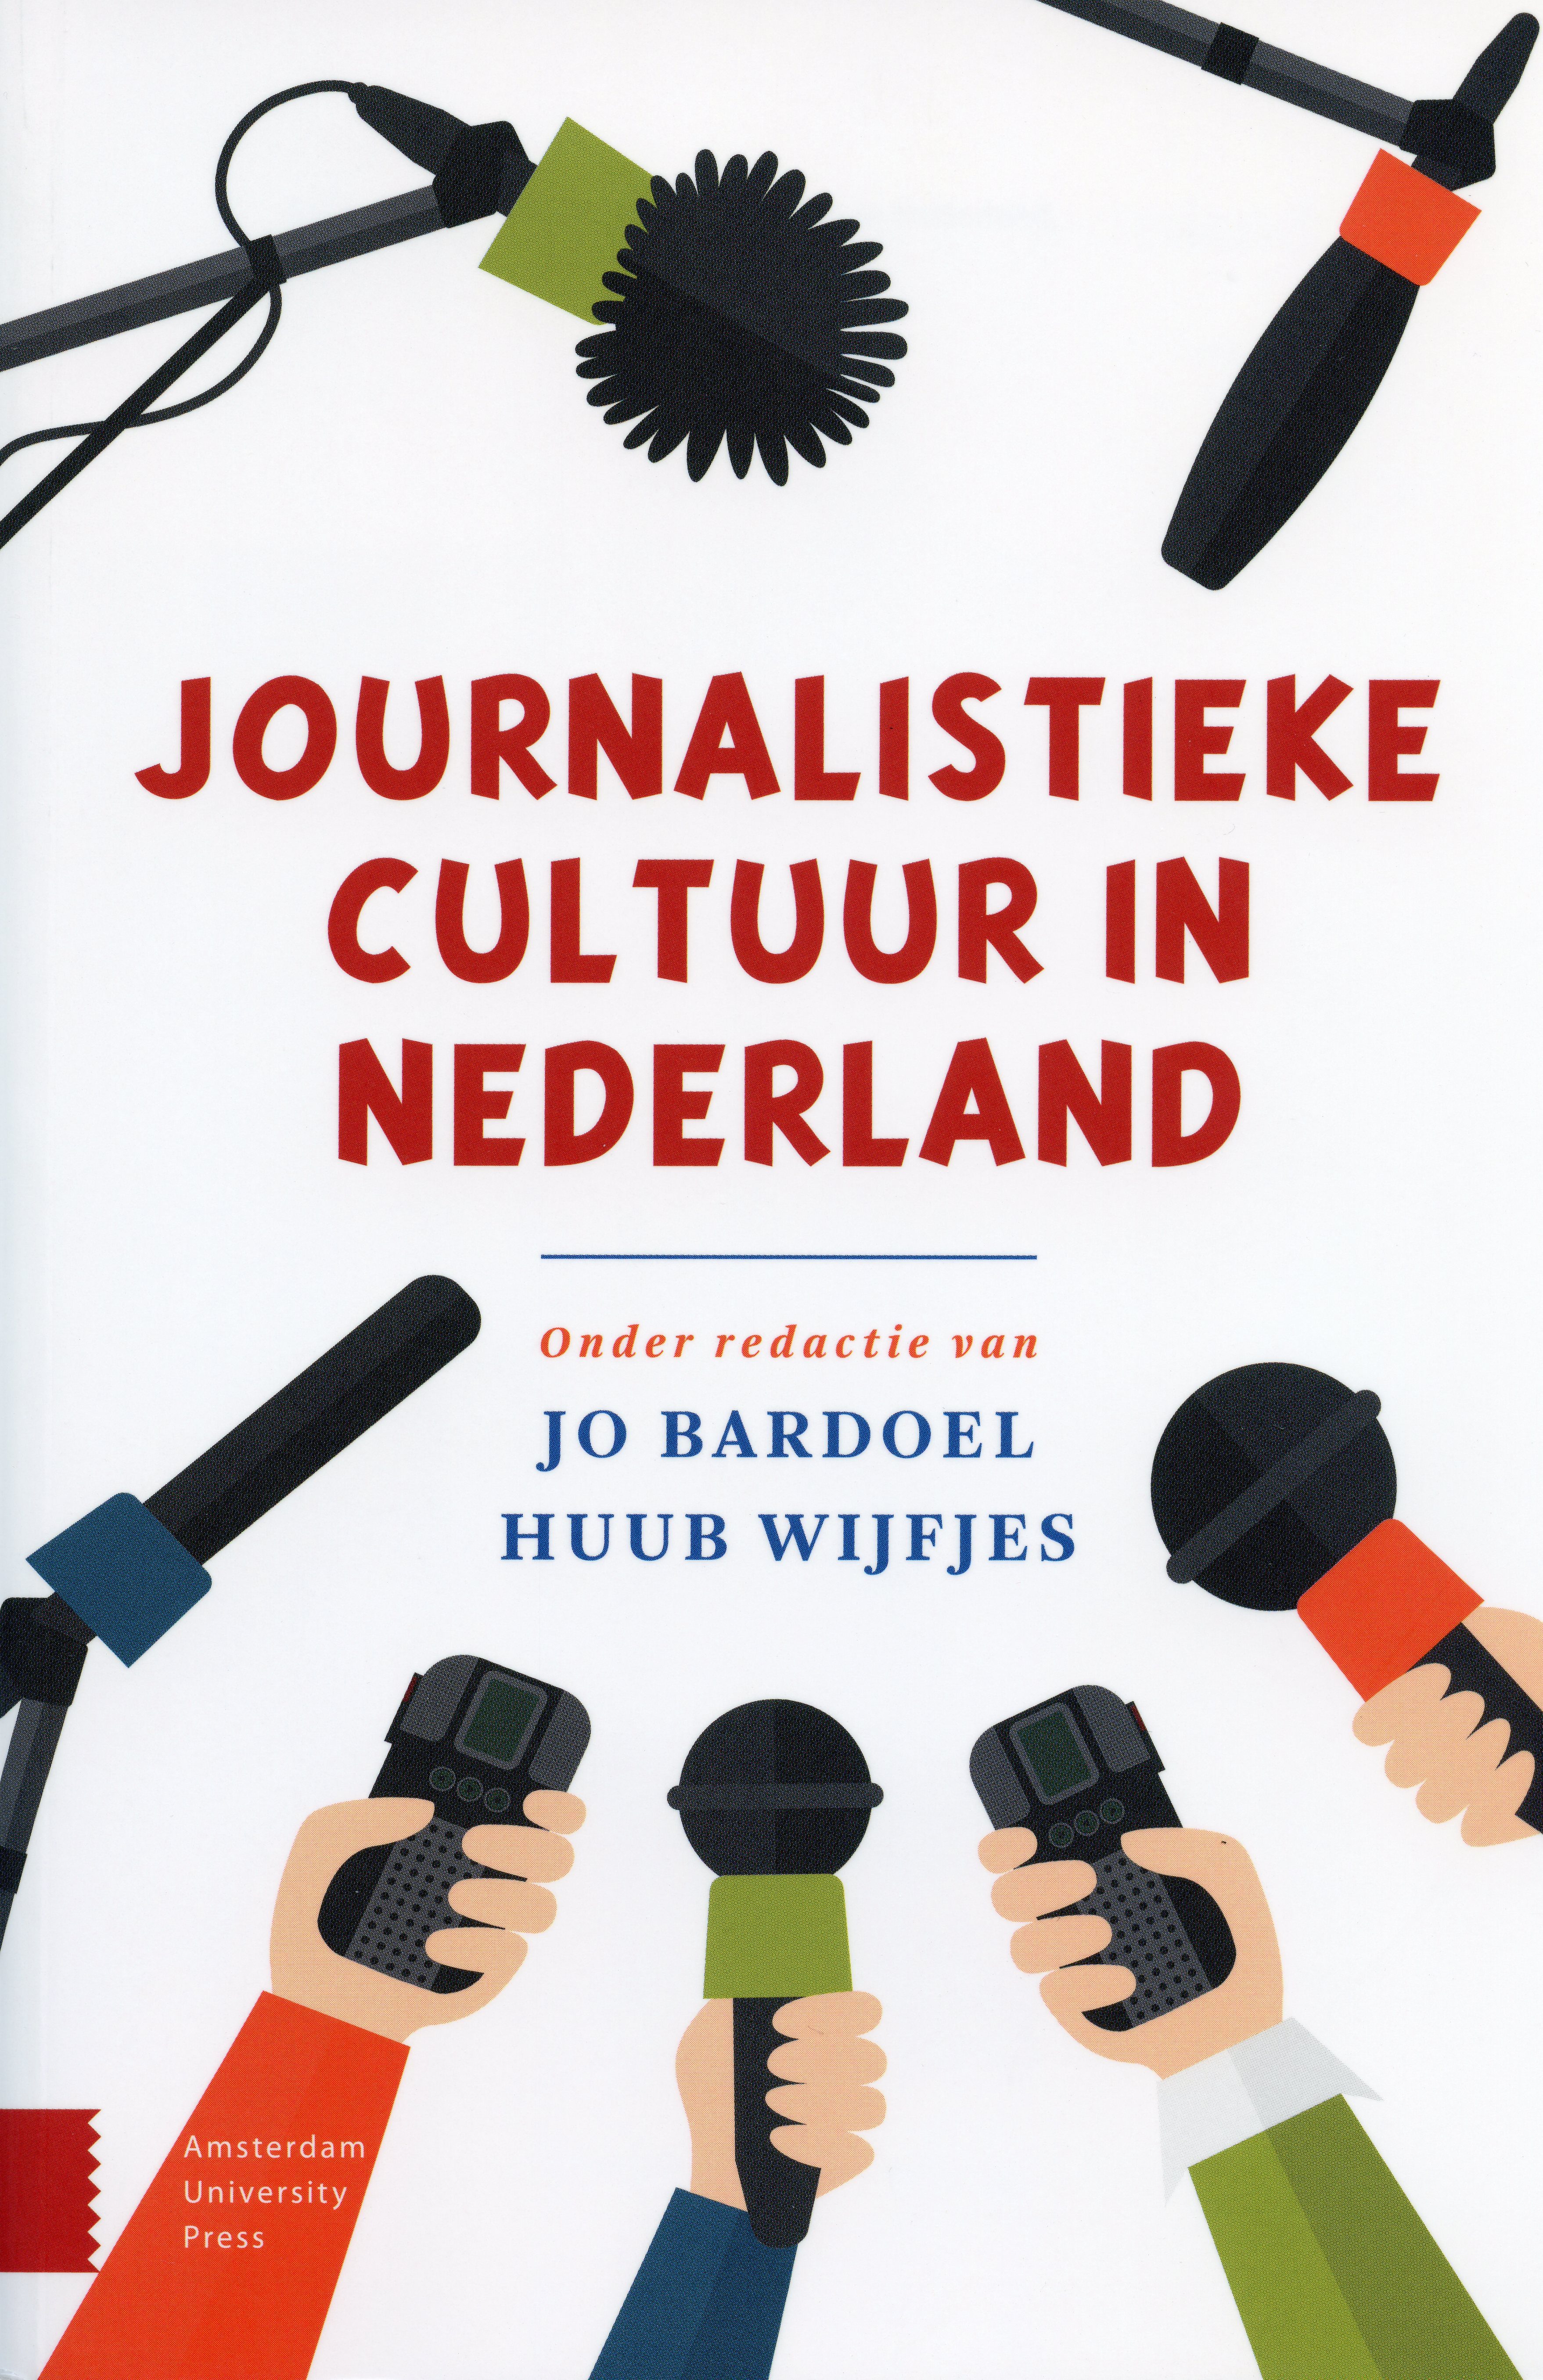 Journalism Culture in the Netherlands 2